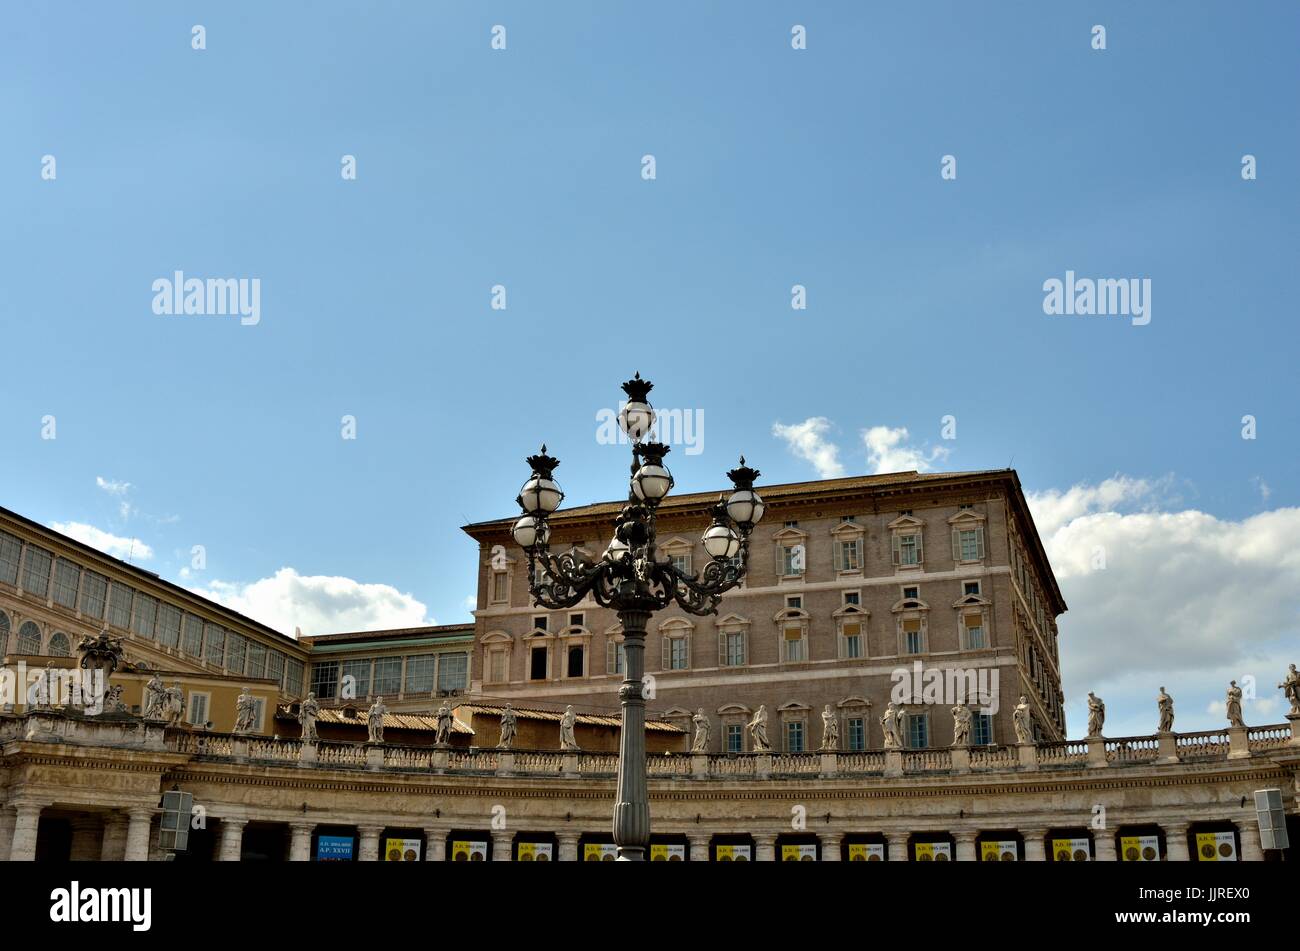 Lamppost in St. Peter's Basilica square with Bernini's statues in a row at the Vatican City, Europe Stock Photo